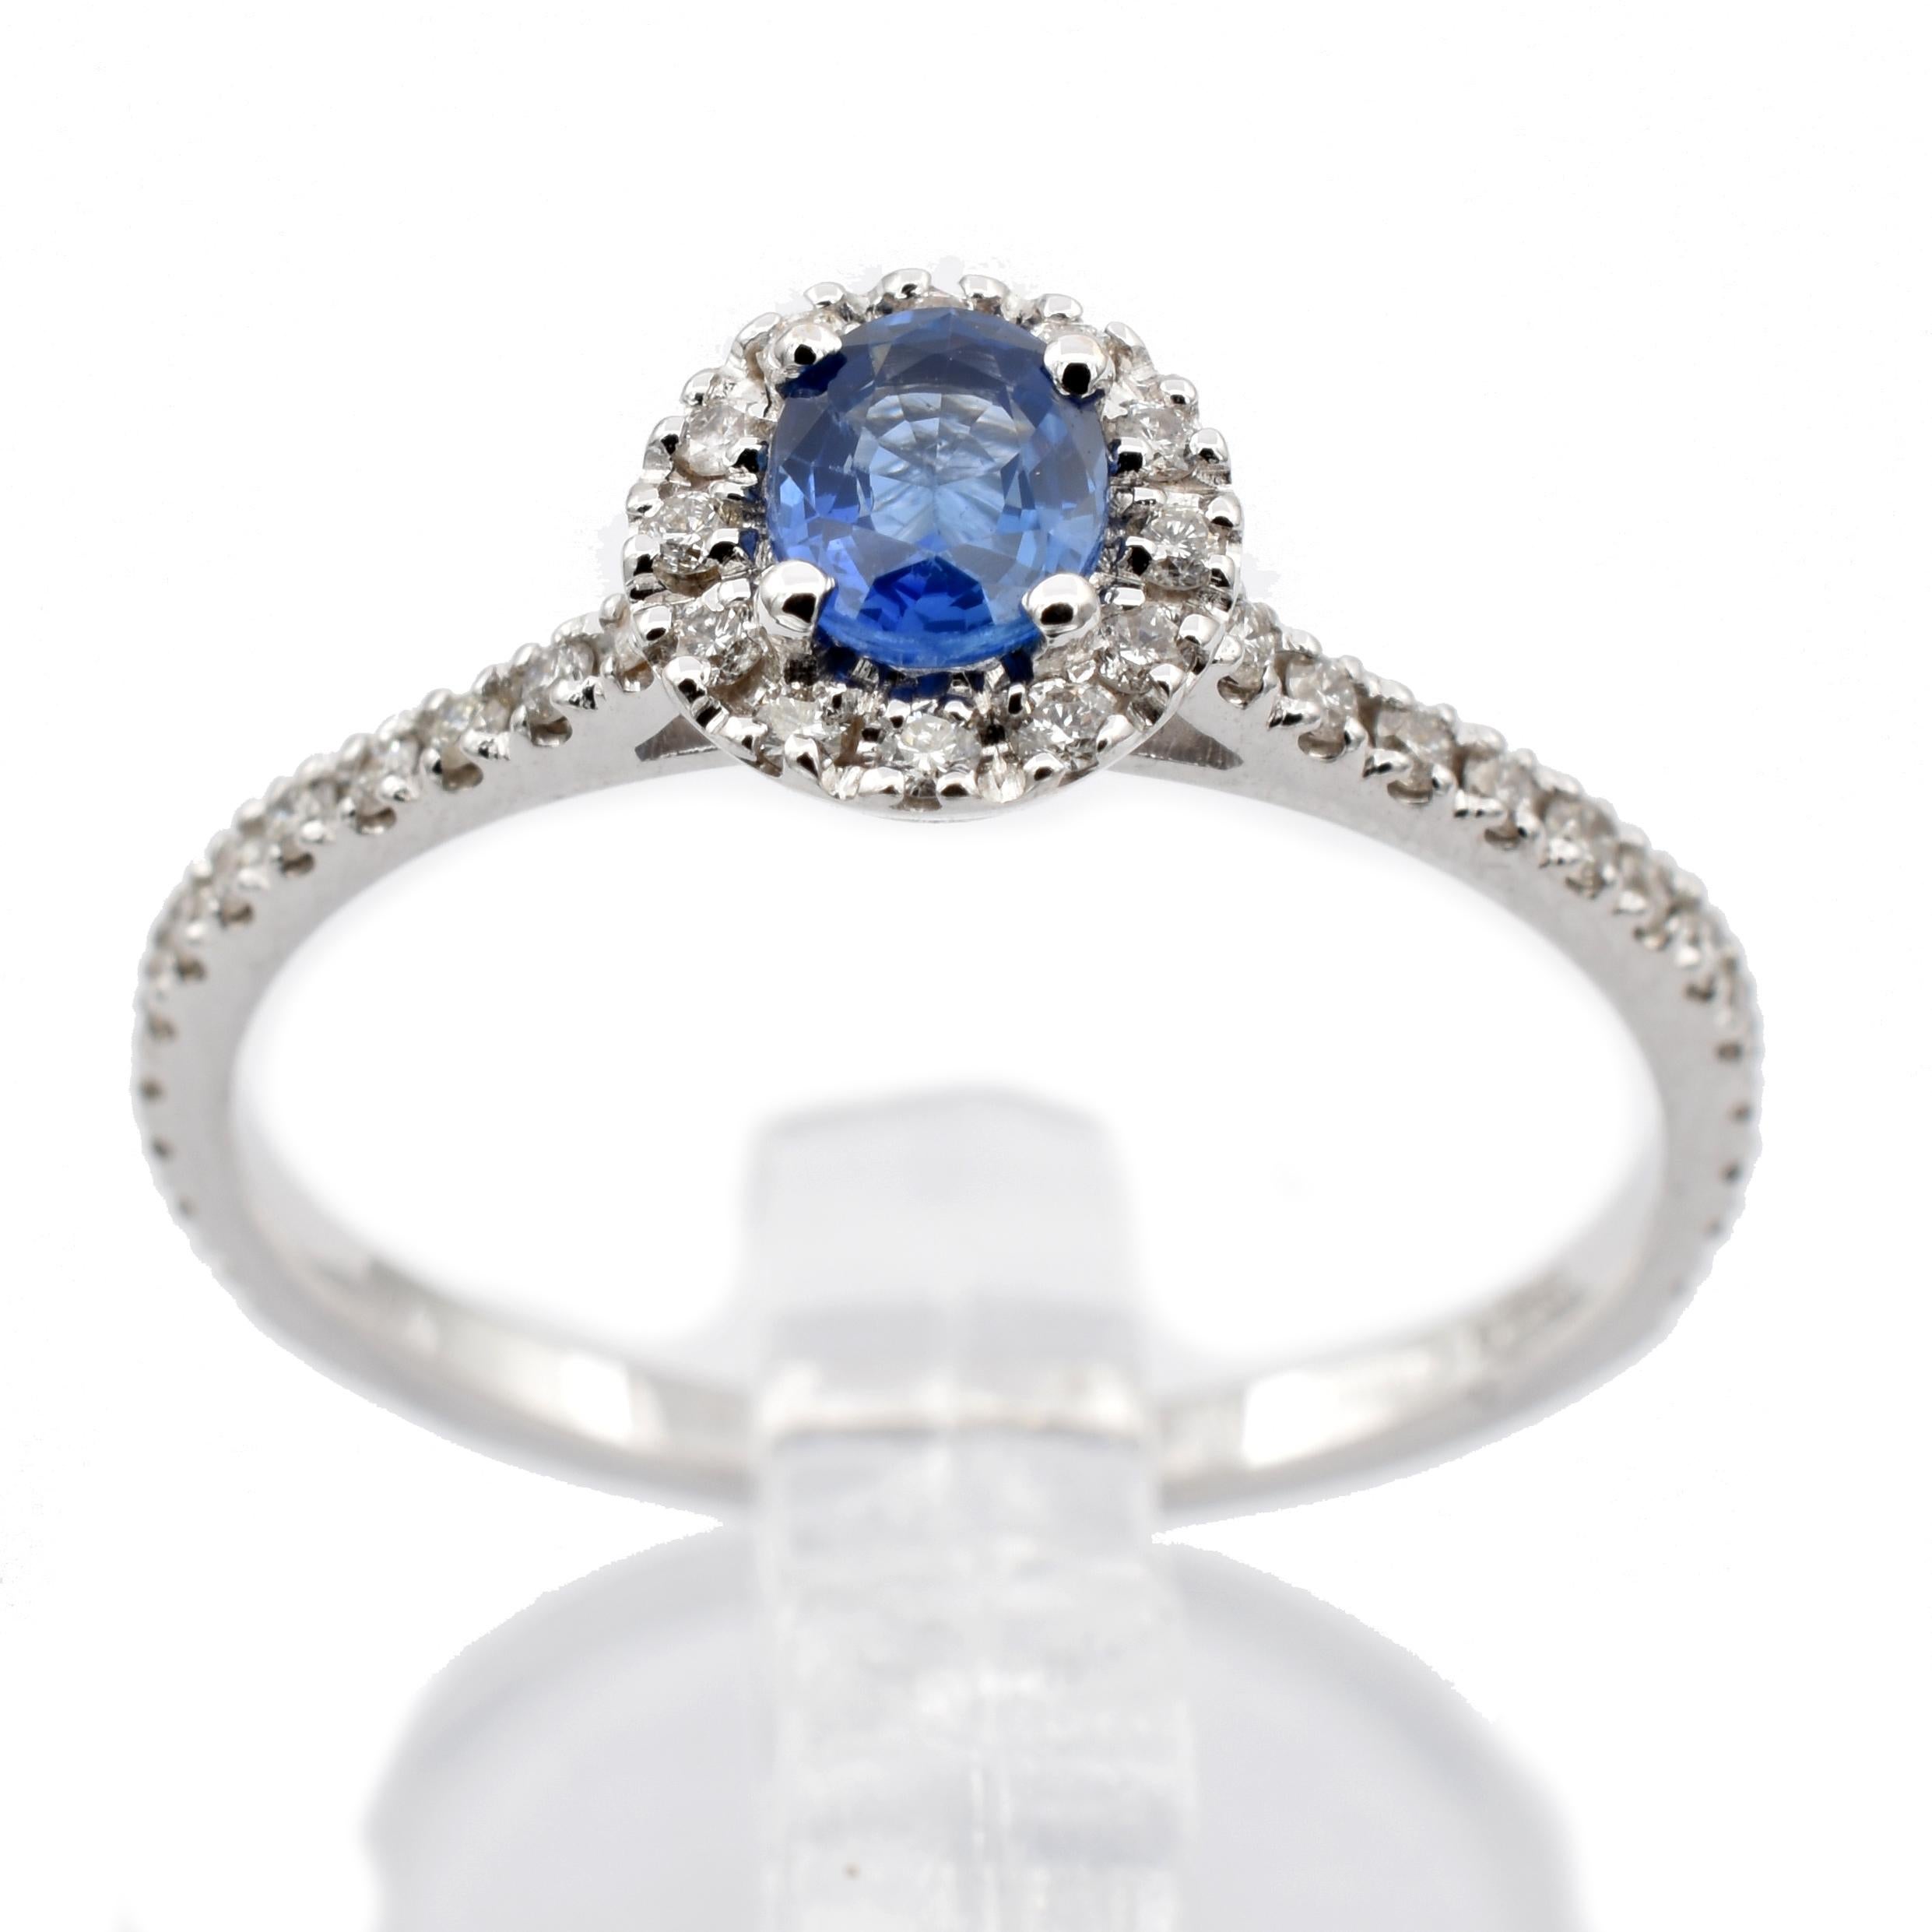 Gilberto Cassola 18Kt White Gold Ring with a Oval Bright Blue Sapphire surrounded by small White Diamonds.
Handmade in Italy in Our Atelier in Valenza (AL)
18Kt Gold g 2.15
Sapphire ct 0.46
Diamonds ct 0.33 
This Ring is sized E 54 (US 6 3/4) and